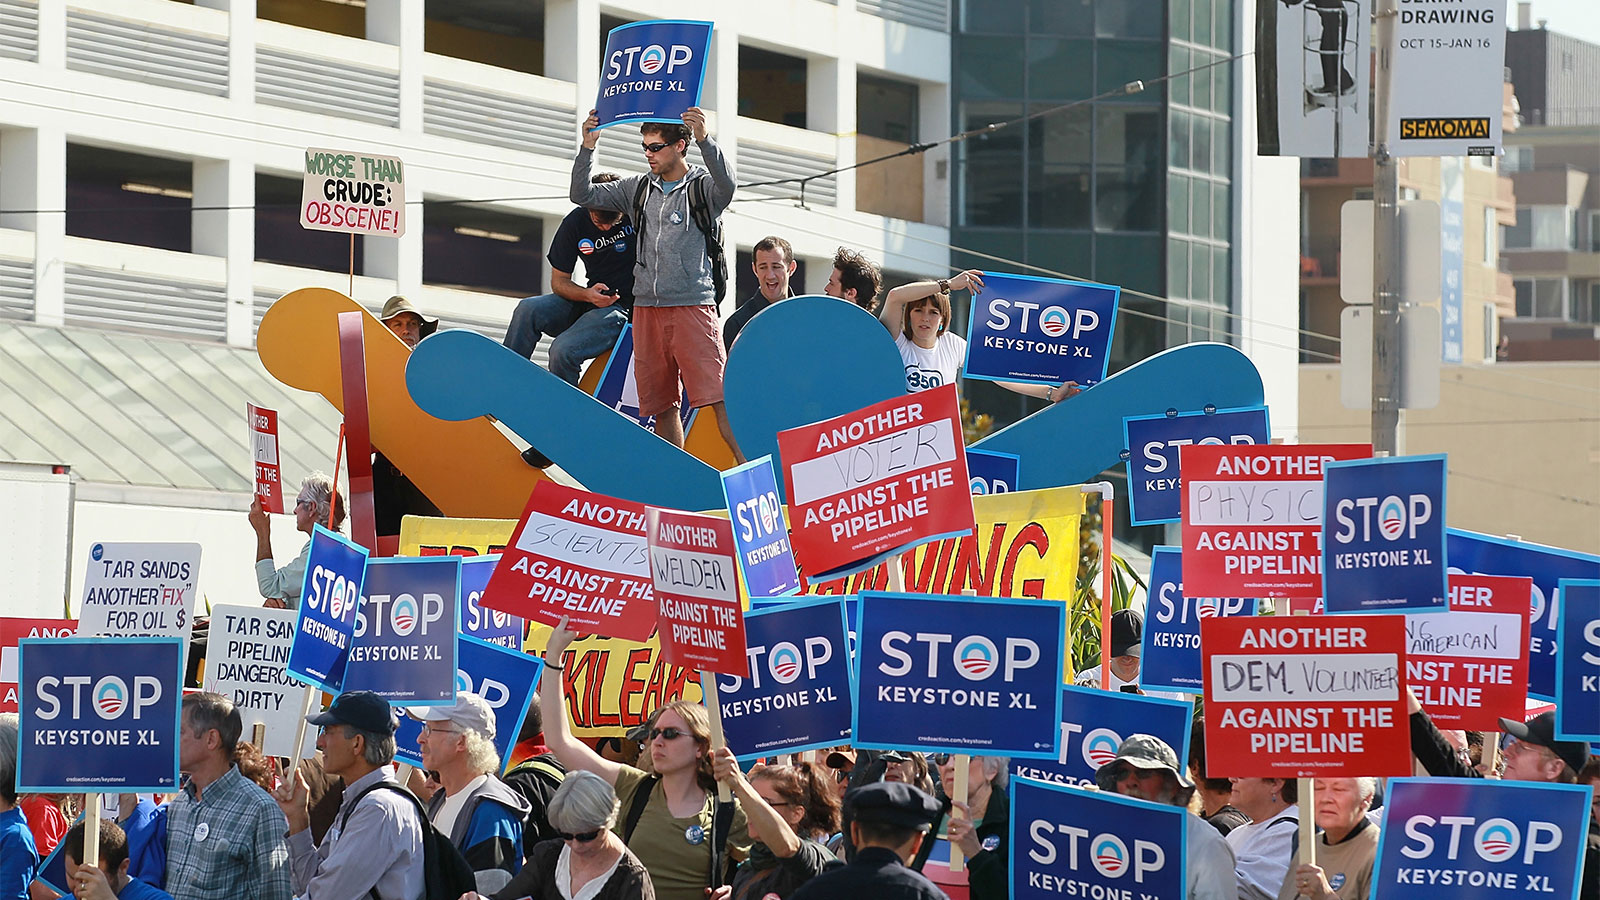 Protestors against the construction of the Keystone XL oil pipeline hold signs and stand on a Keith Haring sculpture as they demonstrate outside of the W Hotel before the arrival of U.S. President Barack Obama on October 25, 2011 in San Francisco, California